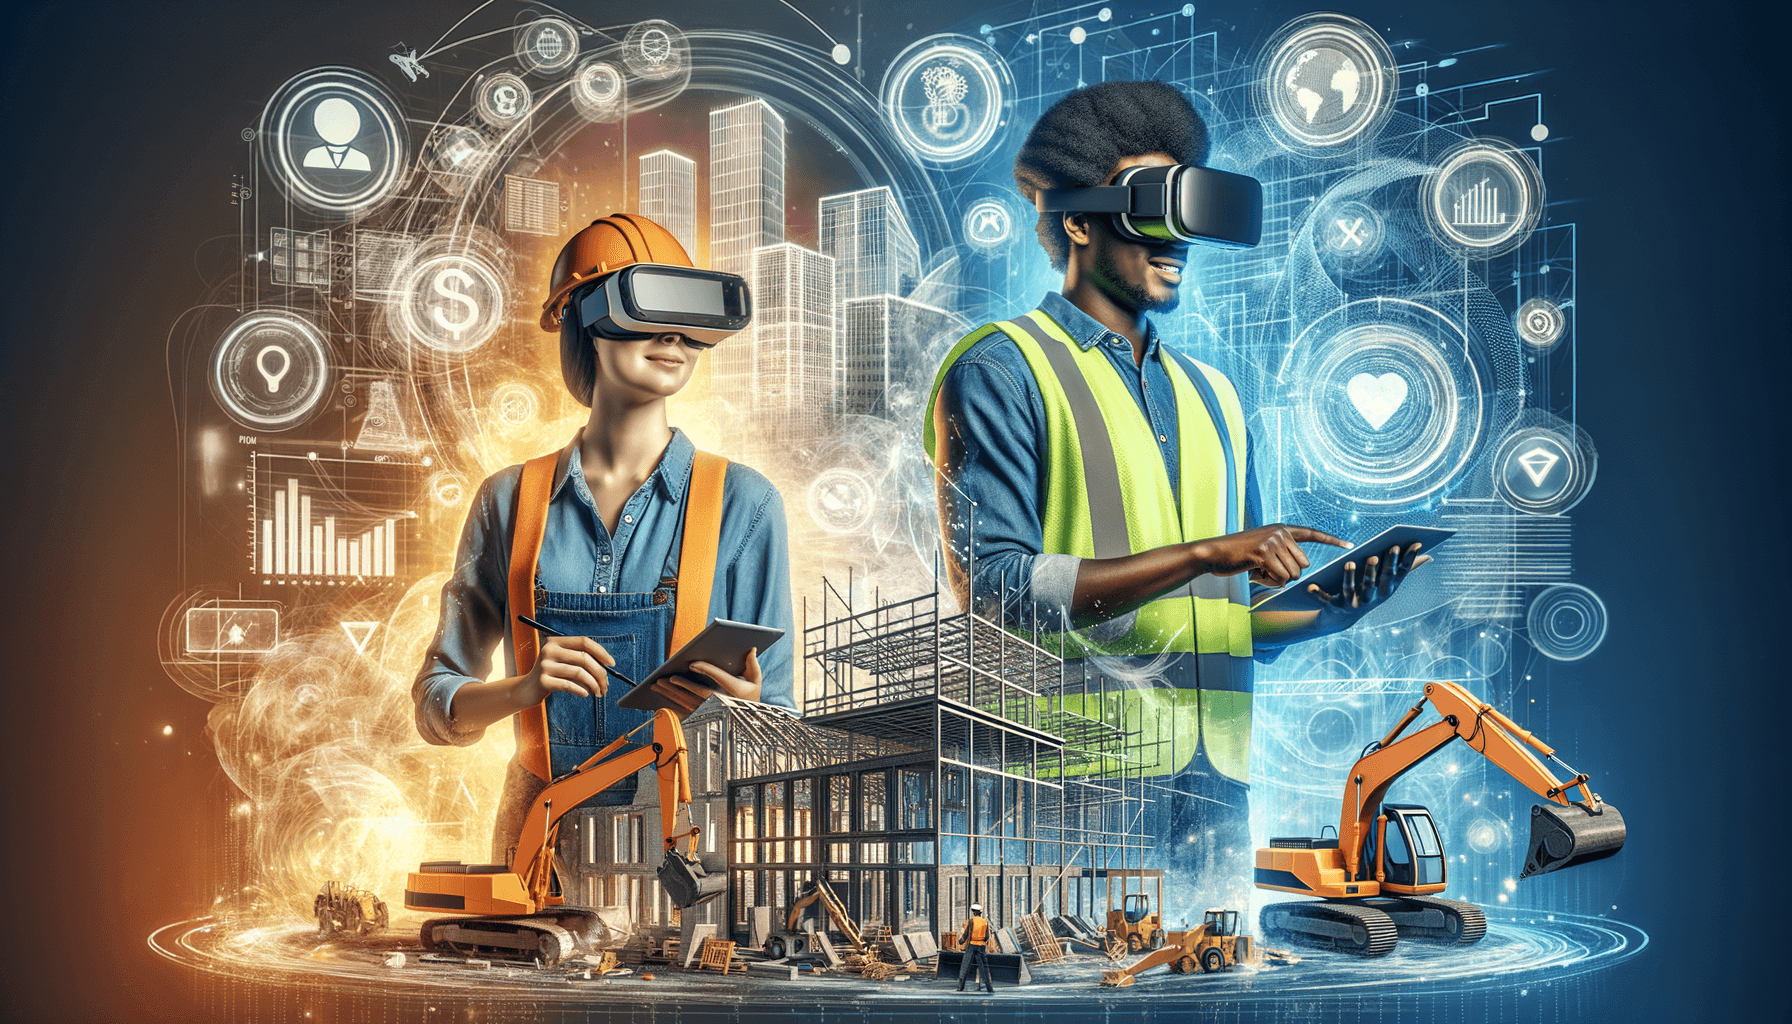 Revolutionizing Construction Safety: Explore the impact of VR in the construction industry with Gravity Jack, showcasing cutting-edge training techniques for remarkable cost savings and enhanced productivity, as industry giants lead the way in VR adoption.